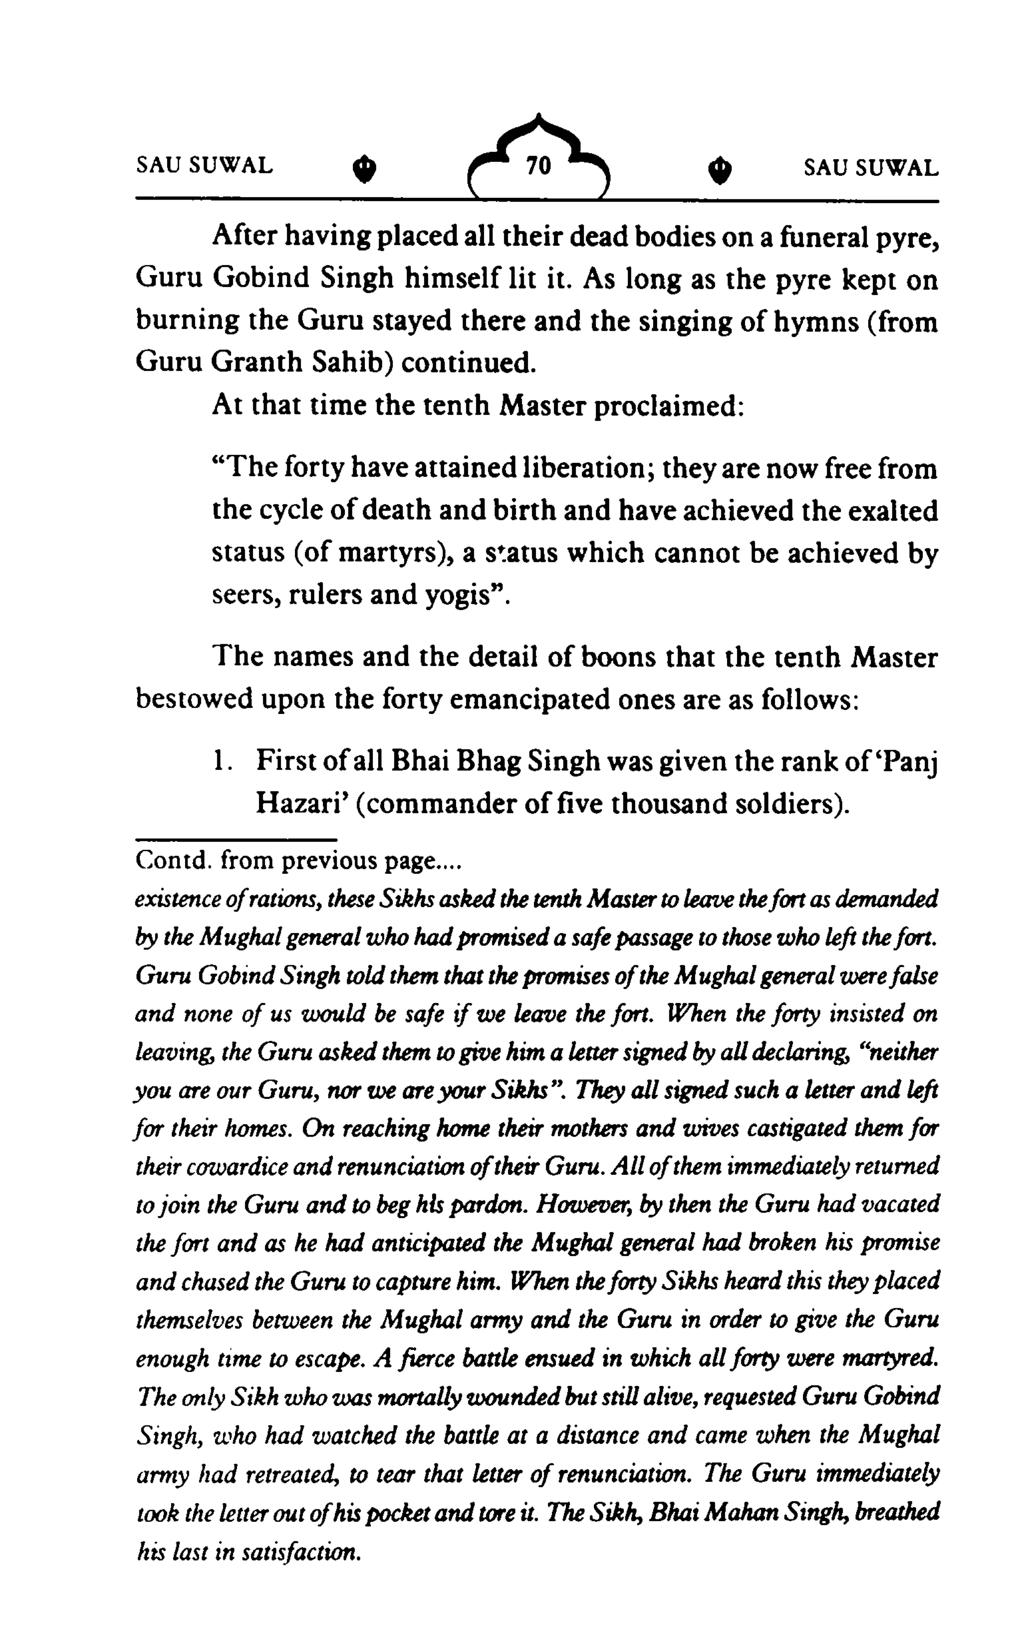 After having placed all their dead bodies on a funeral pyre, Guru Gobind Singh himself lit it.